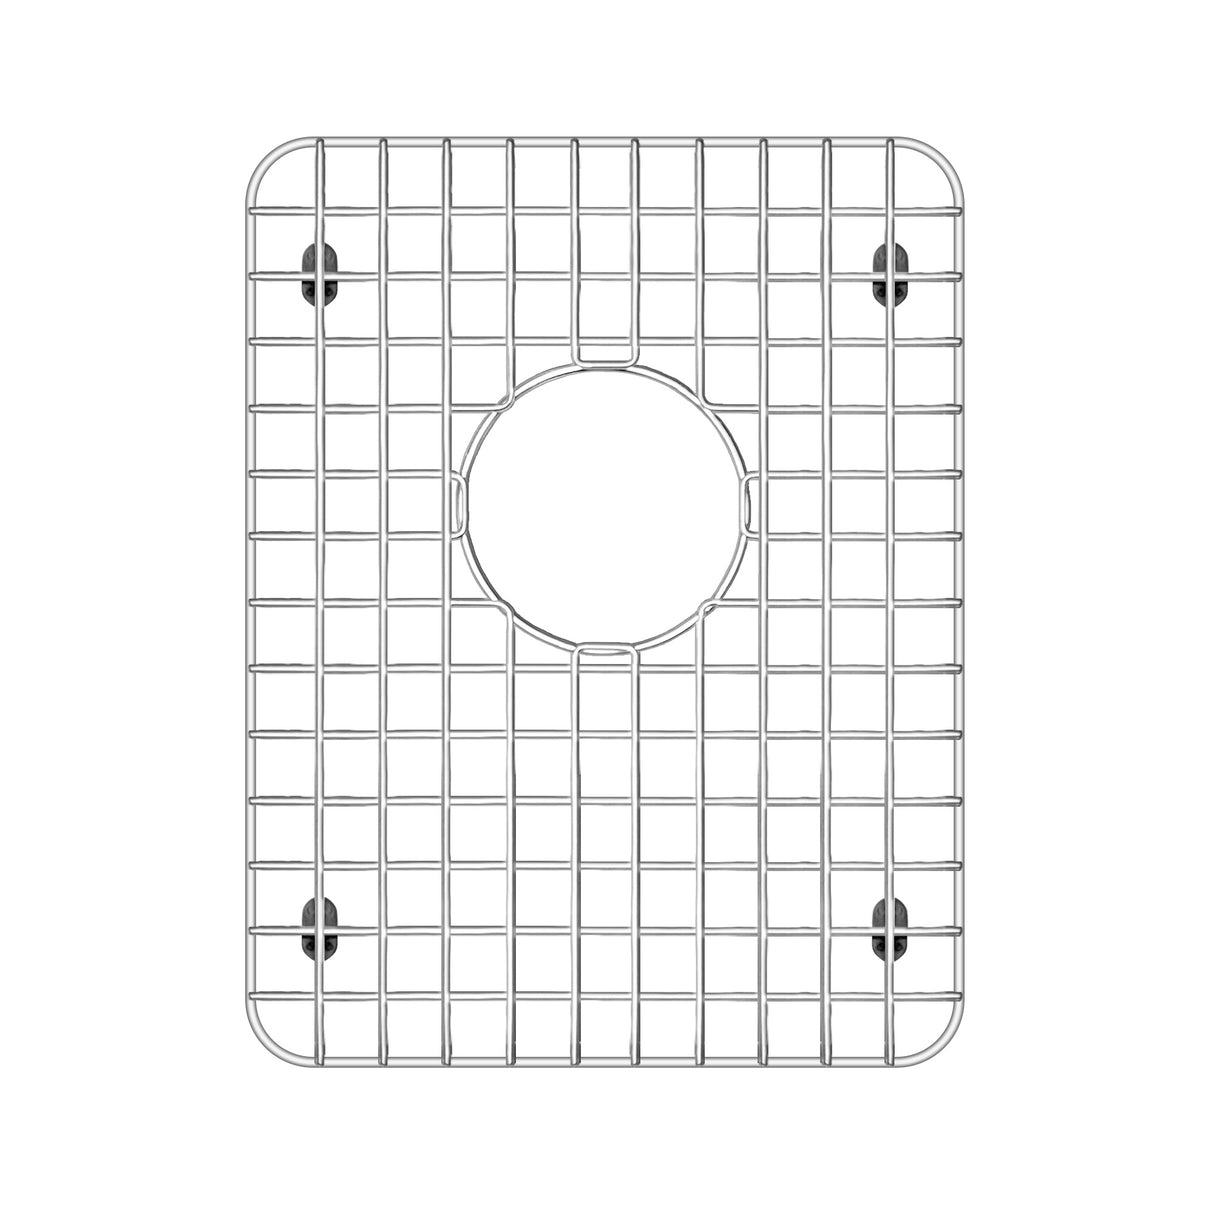 Stainless Steel Kitchen Sink Grid For Noah's Sink Model WHNC3220